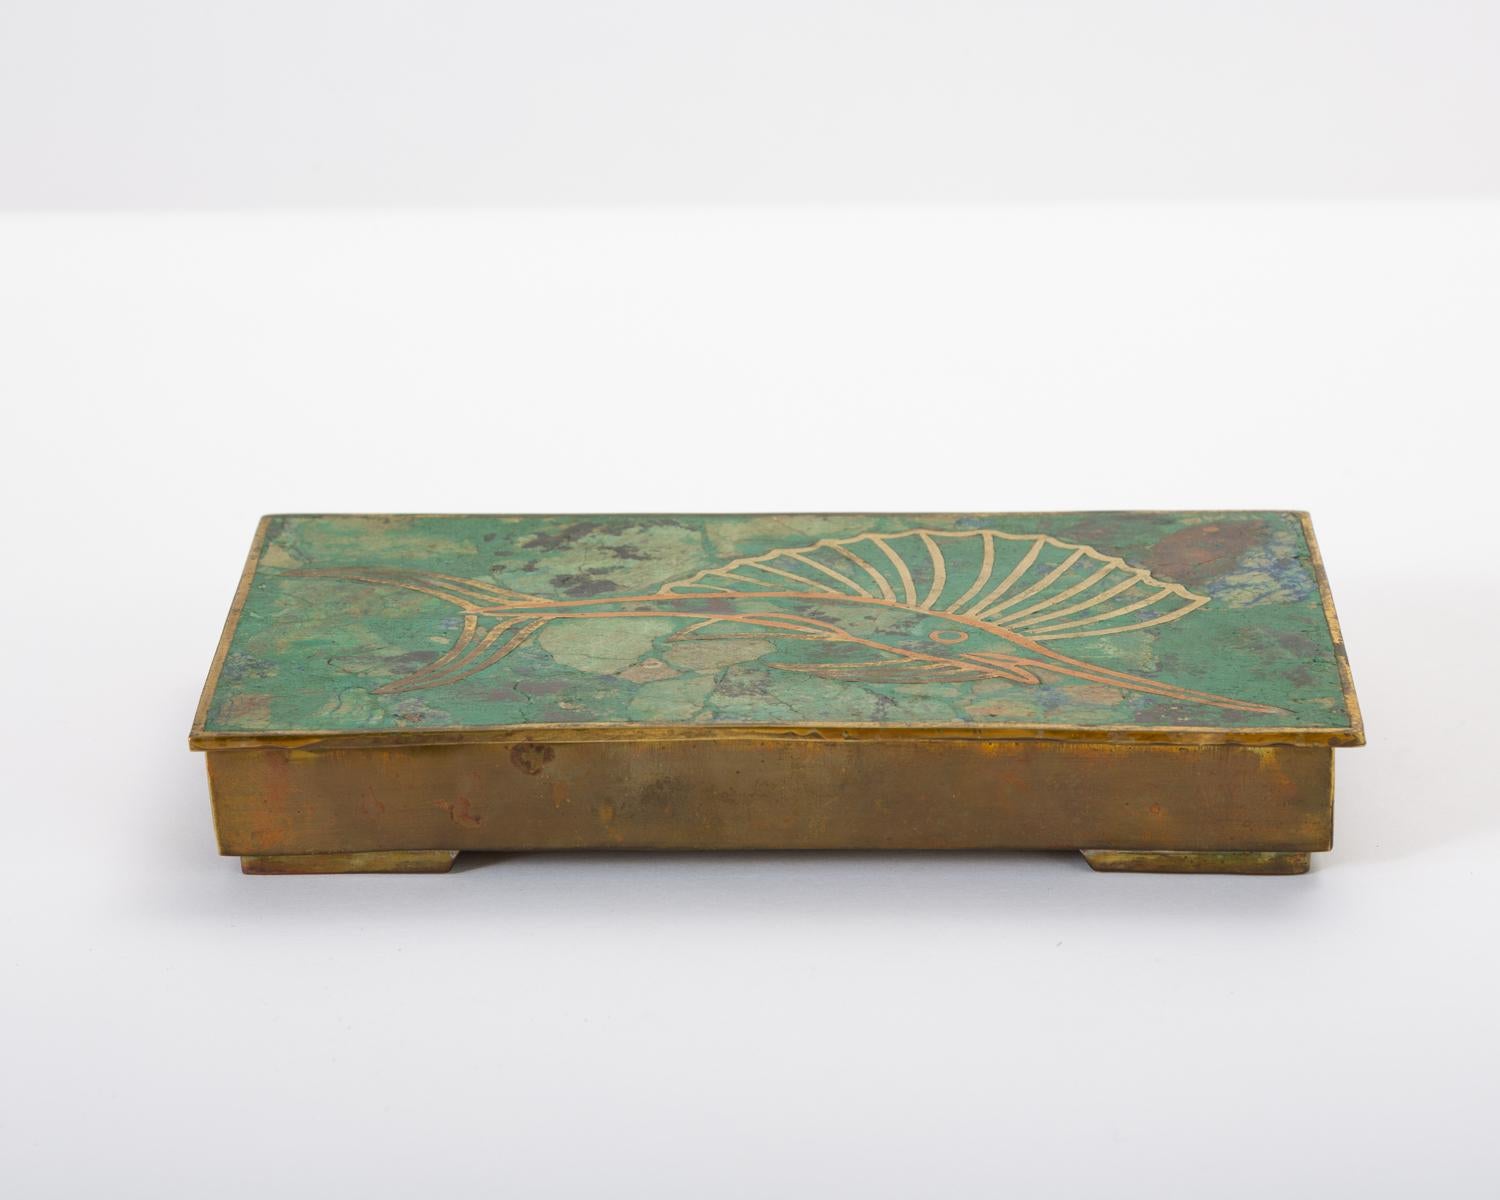 A modern interpretation of cloisonné technique after the designs of José Mendoza for Pepe Mendoza. The brass box has a sailfish design on lid with a brass border, with a vitreous enamel in marbled green and gold tones. Interior compartment is